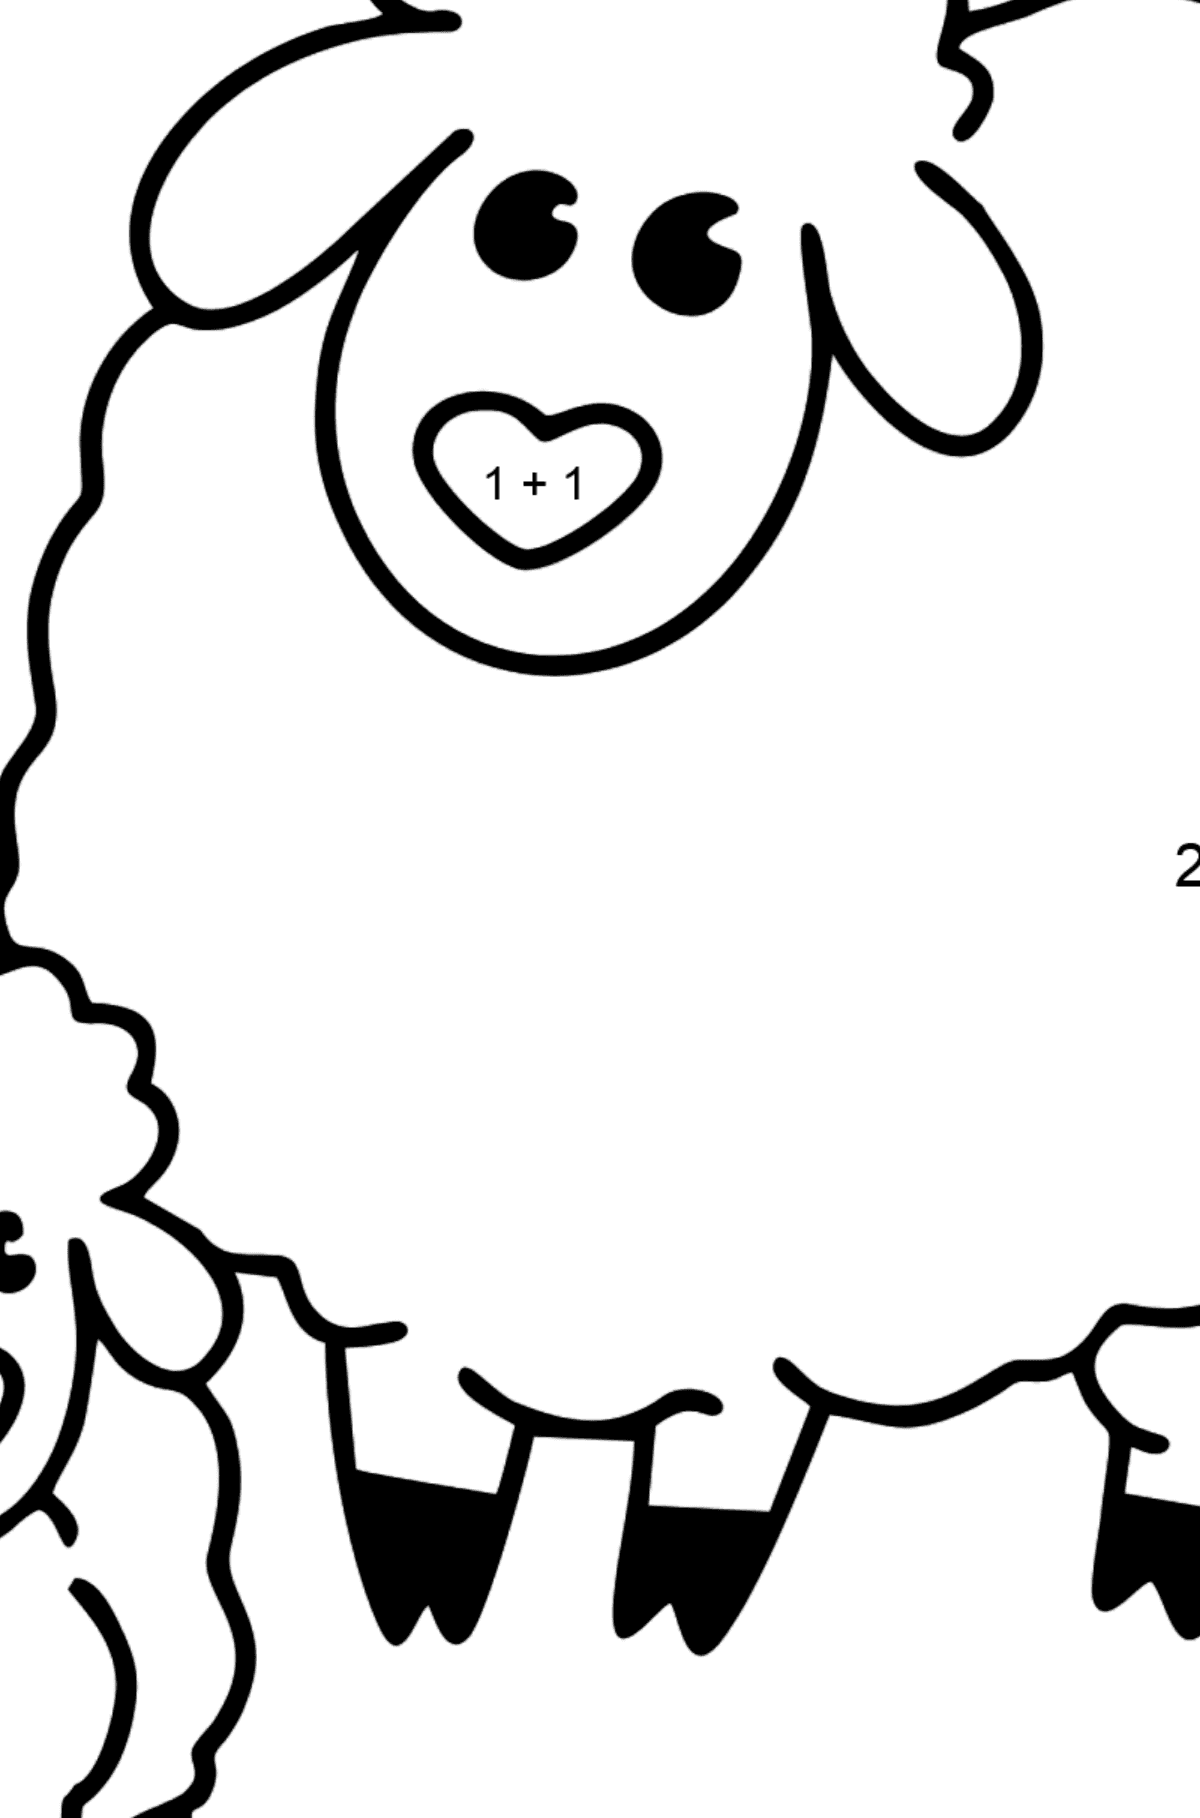 Sheep with Lamb coloring page - Math Coloring - Addition for Kids